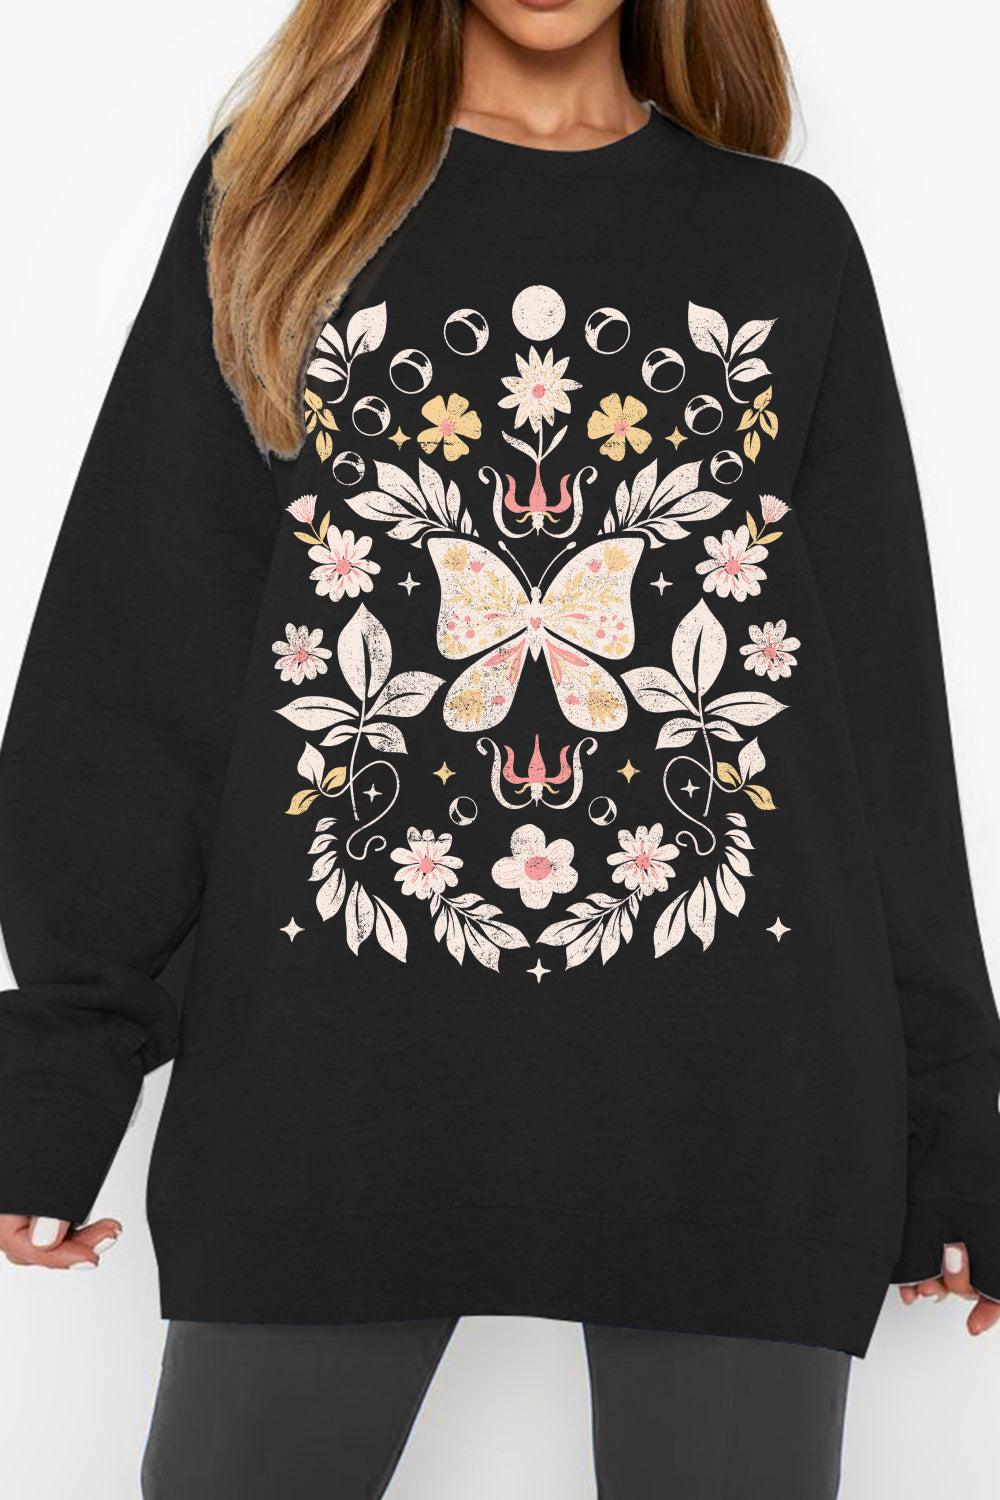 Simply Love Full Size Flower and Butterfly Graphic Sweatshirt BLUE ZONE PLANET